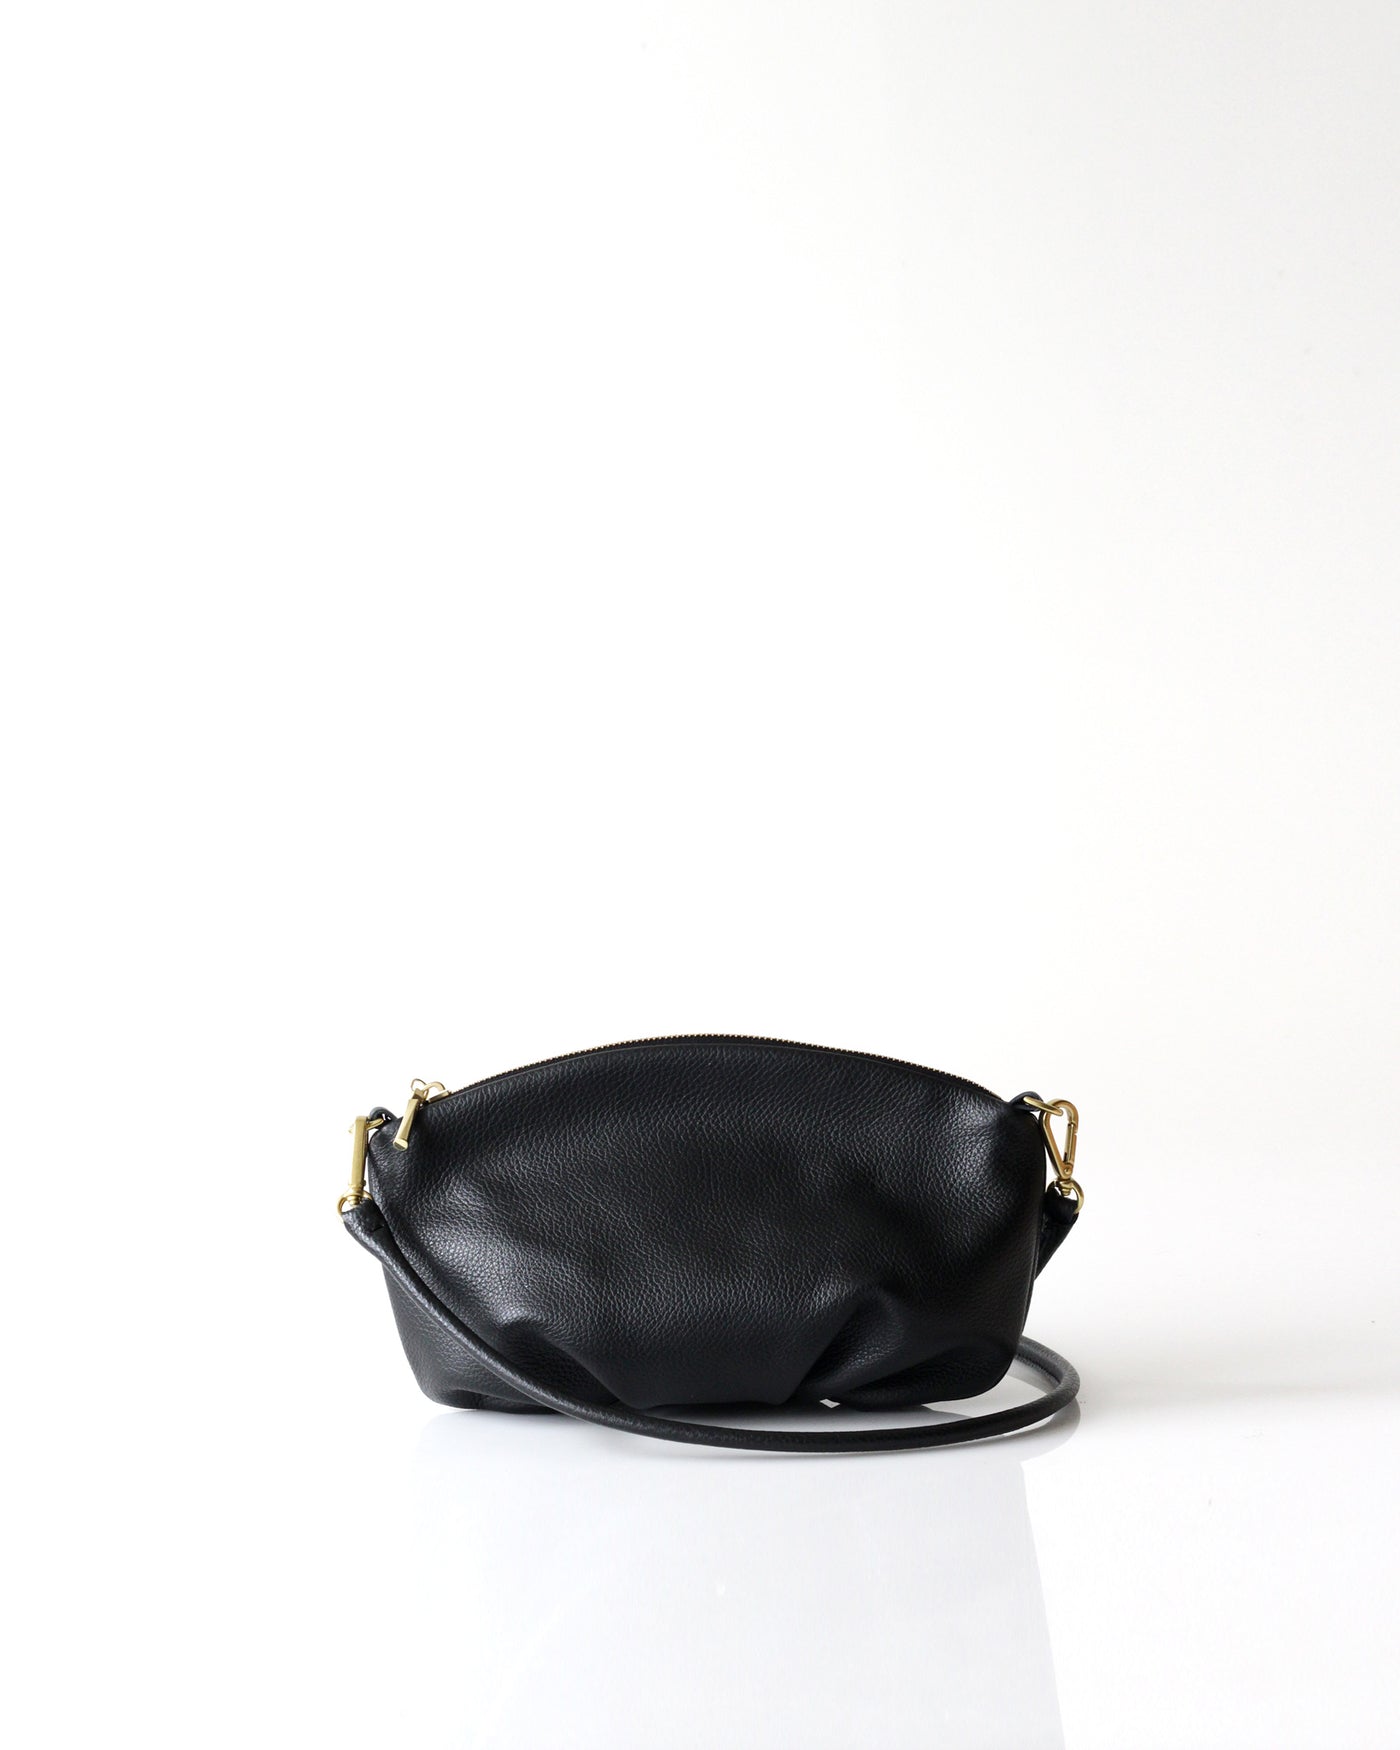 Pochette - Opelle bag Permanent Collection - Opelle leather handbag handcrafted leather bag toronto Canada